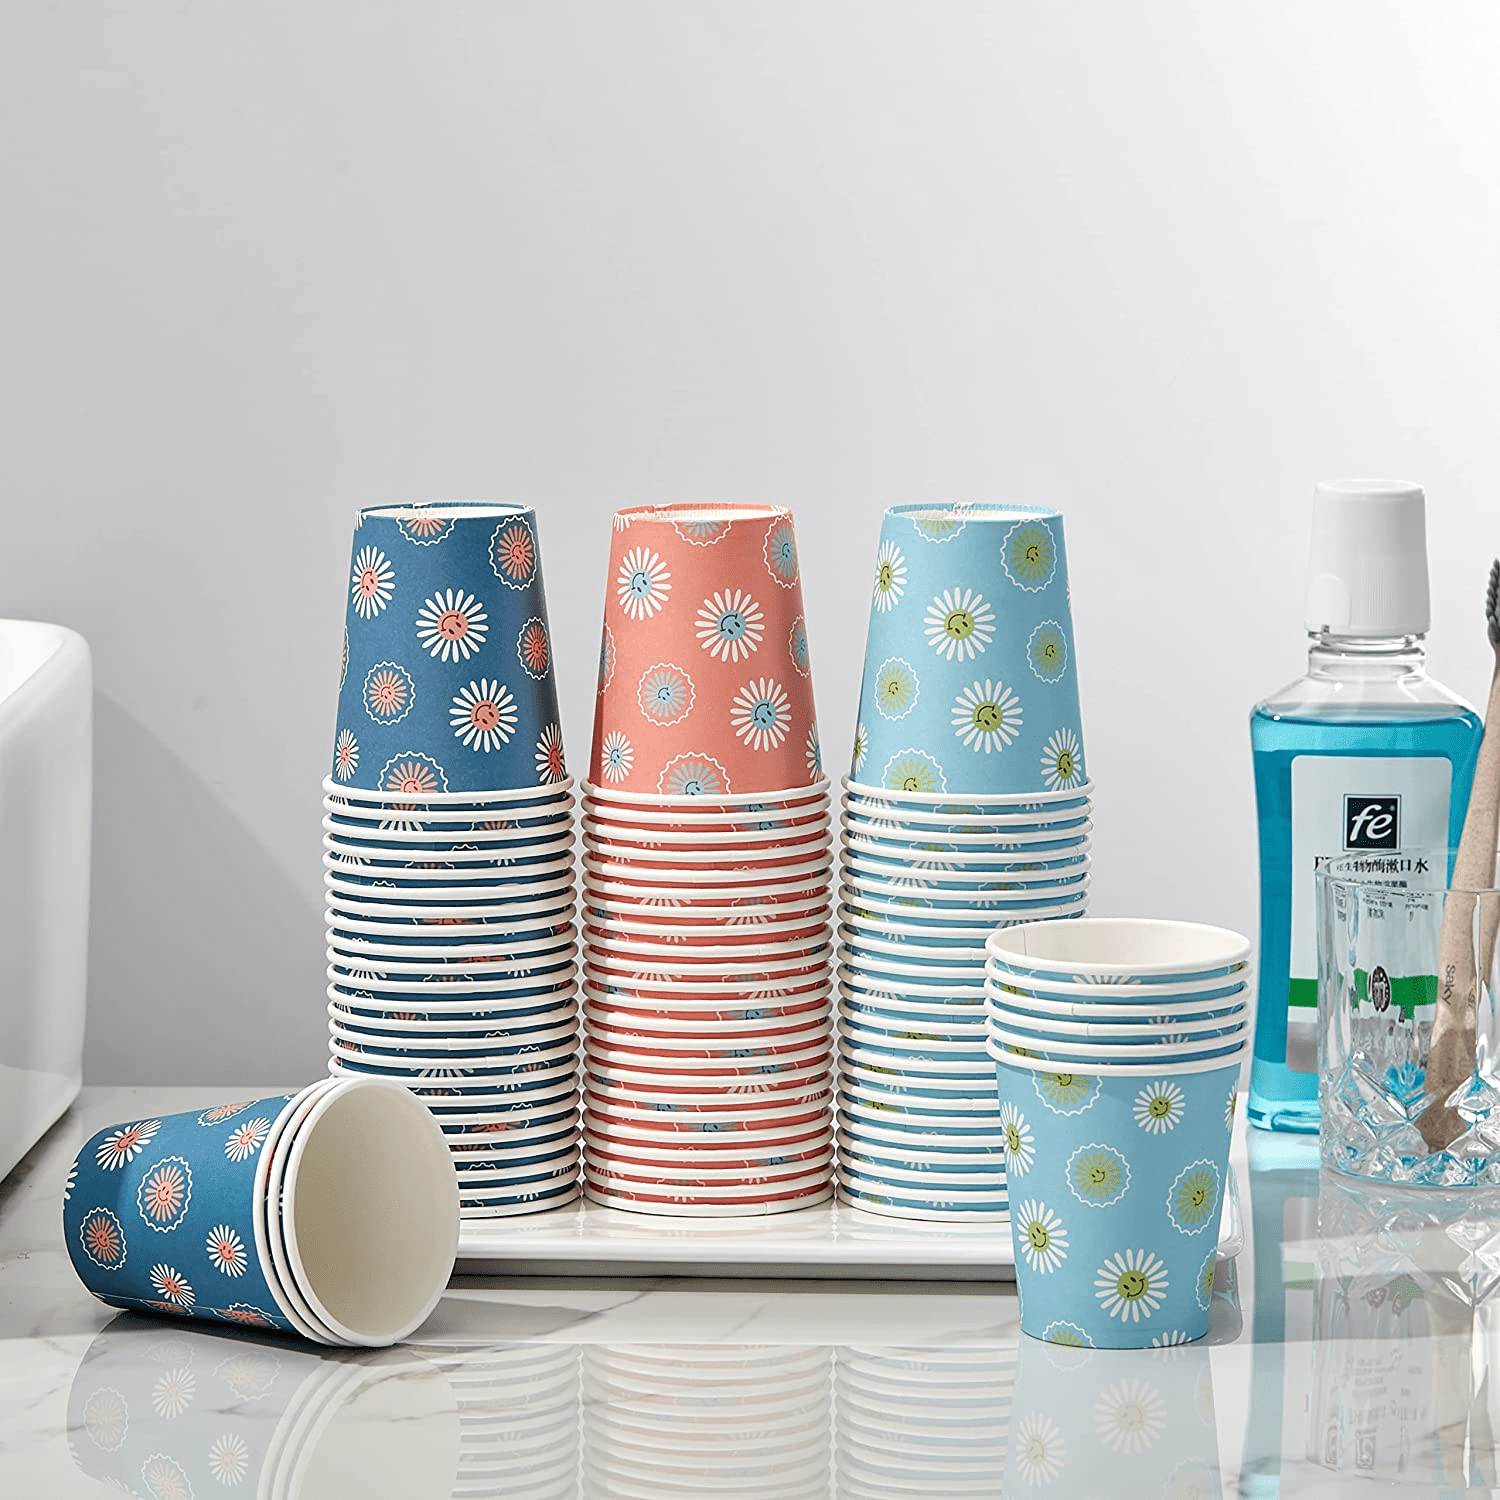  SIUQ 600 Pack 3 oz Paper Cups, Disposable Bathroom Cups, Small  Mouthwash Cups, White Paper Cups, Hot/Cold Beverage Drinking Cup for  Bathroom, Home, Party, Office, Picnic, Travel and Events : Health